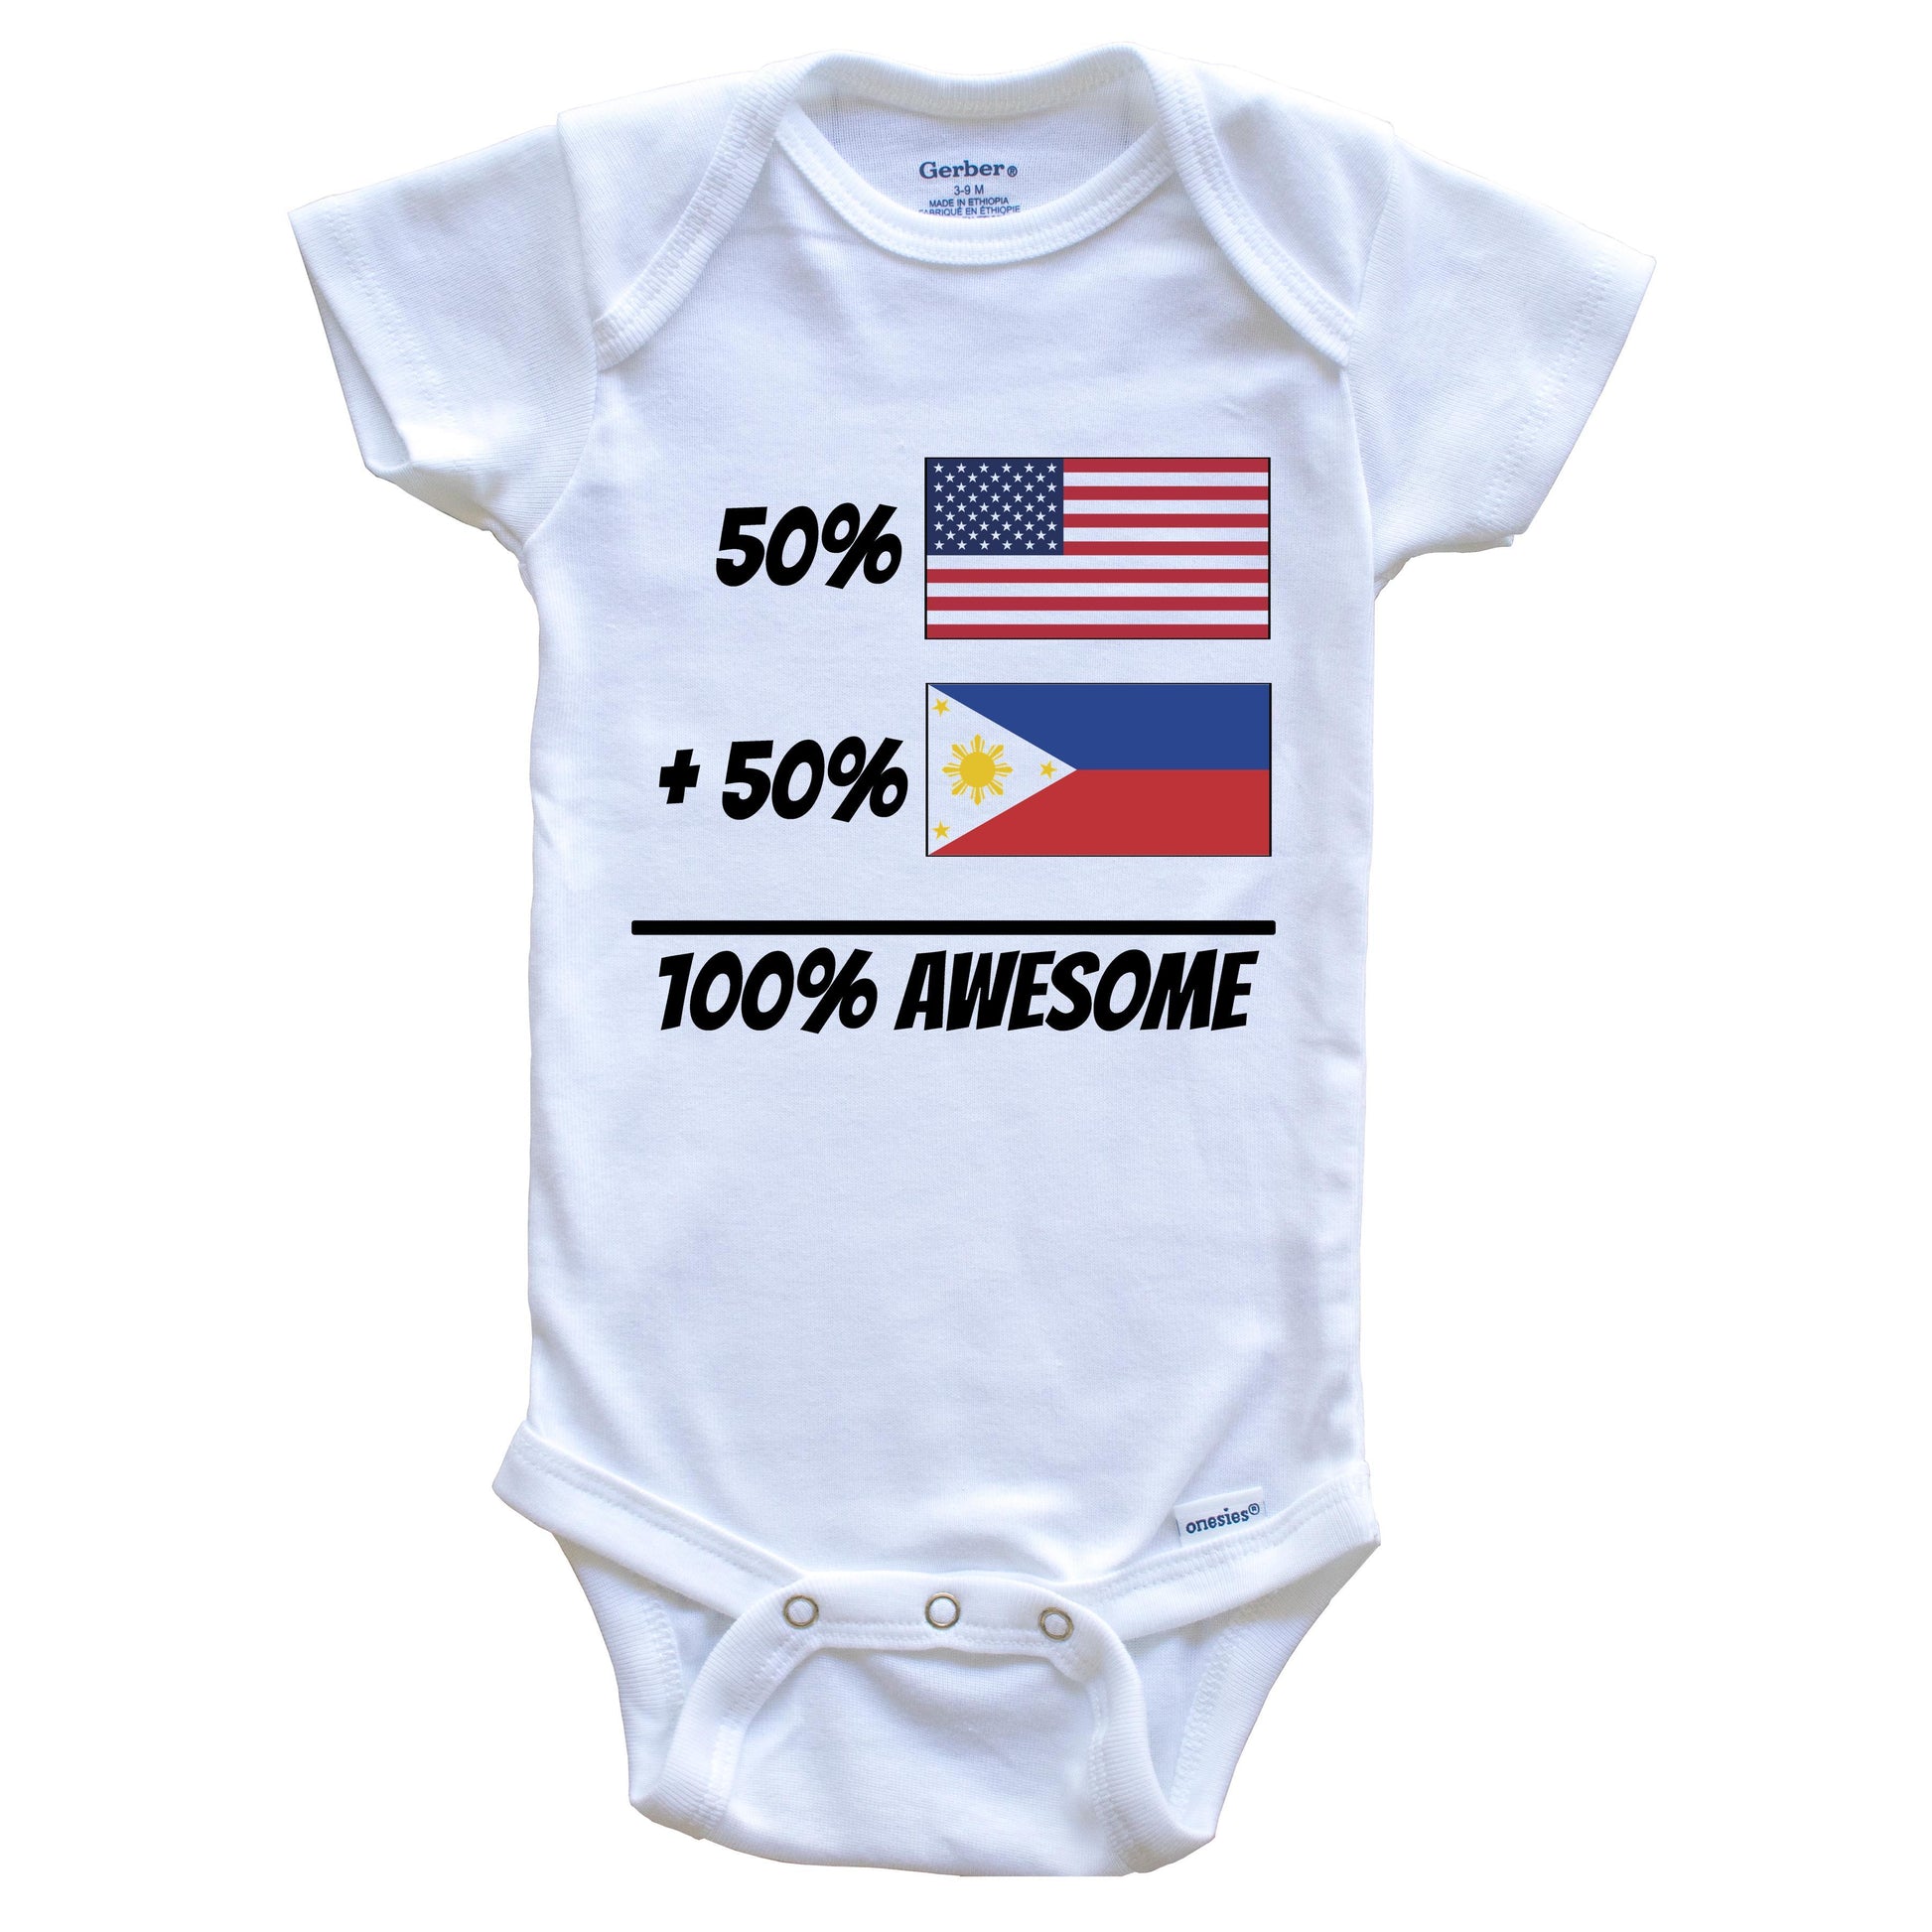 50% American Plus 50% Filipino Equals 100% Awesome Cute Philippines Flag Baby Onesie